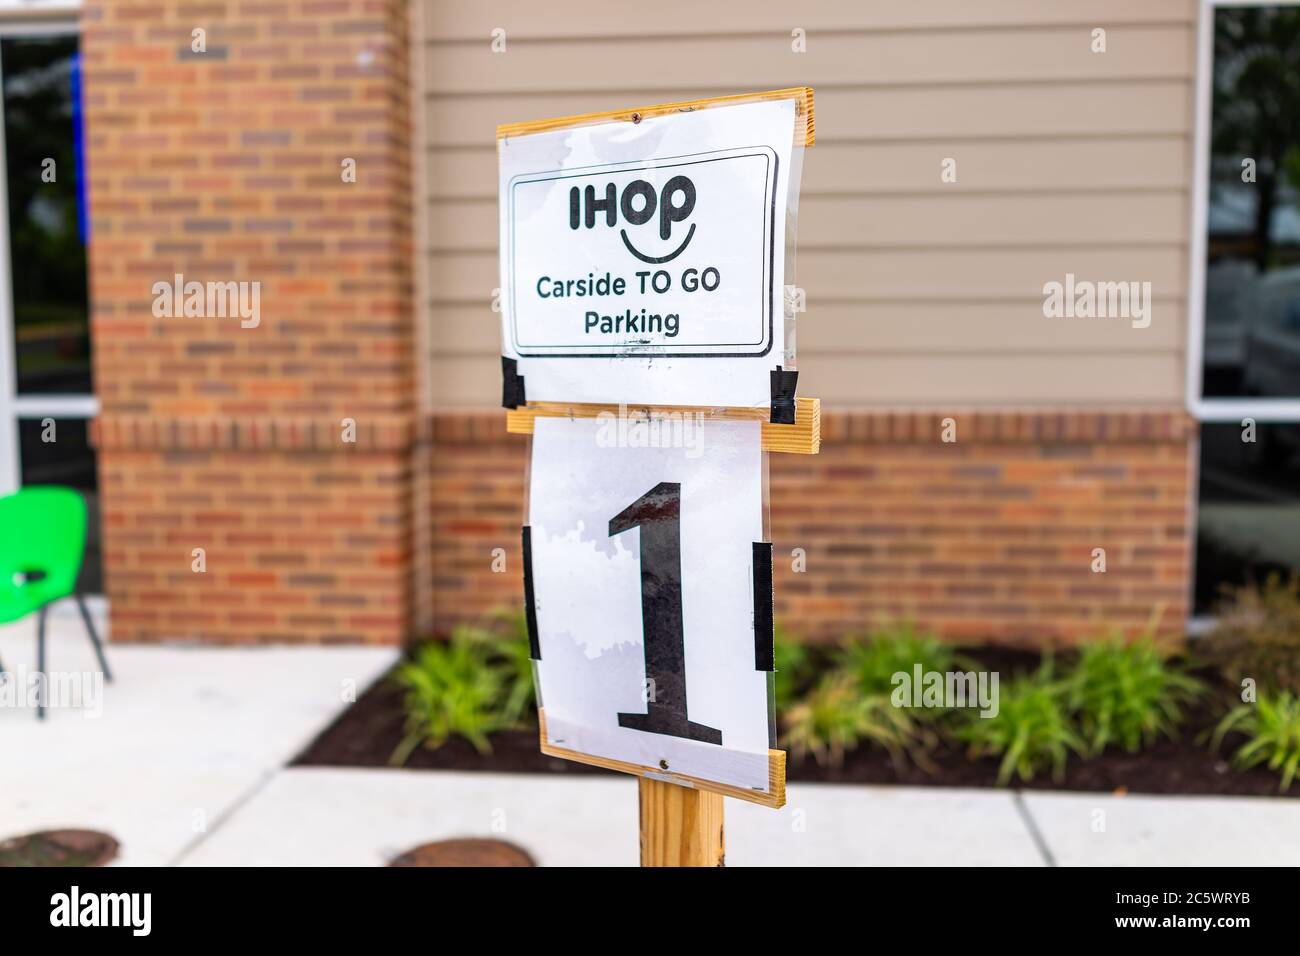 Herndon, USA - June 11, 2020: Virginia Fairfax County closeup of parking spot sign for open ihop restaurant for take-out and delivery during coronavir Stock Photo